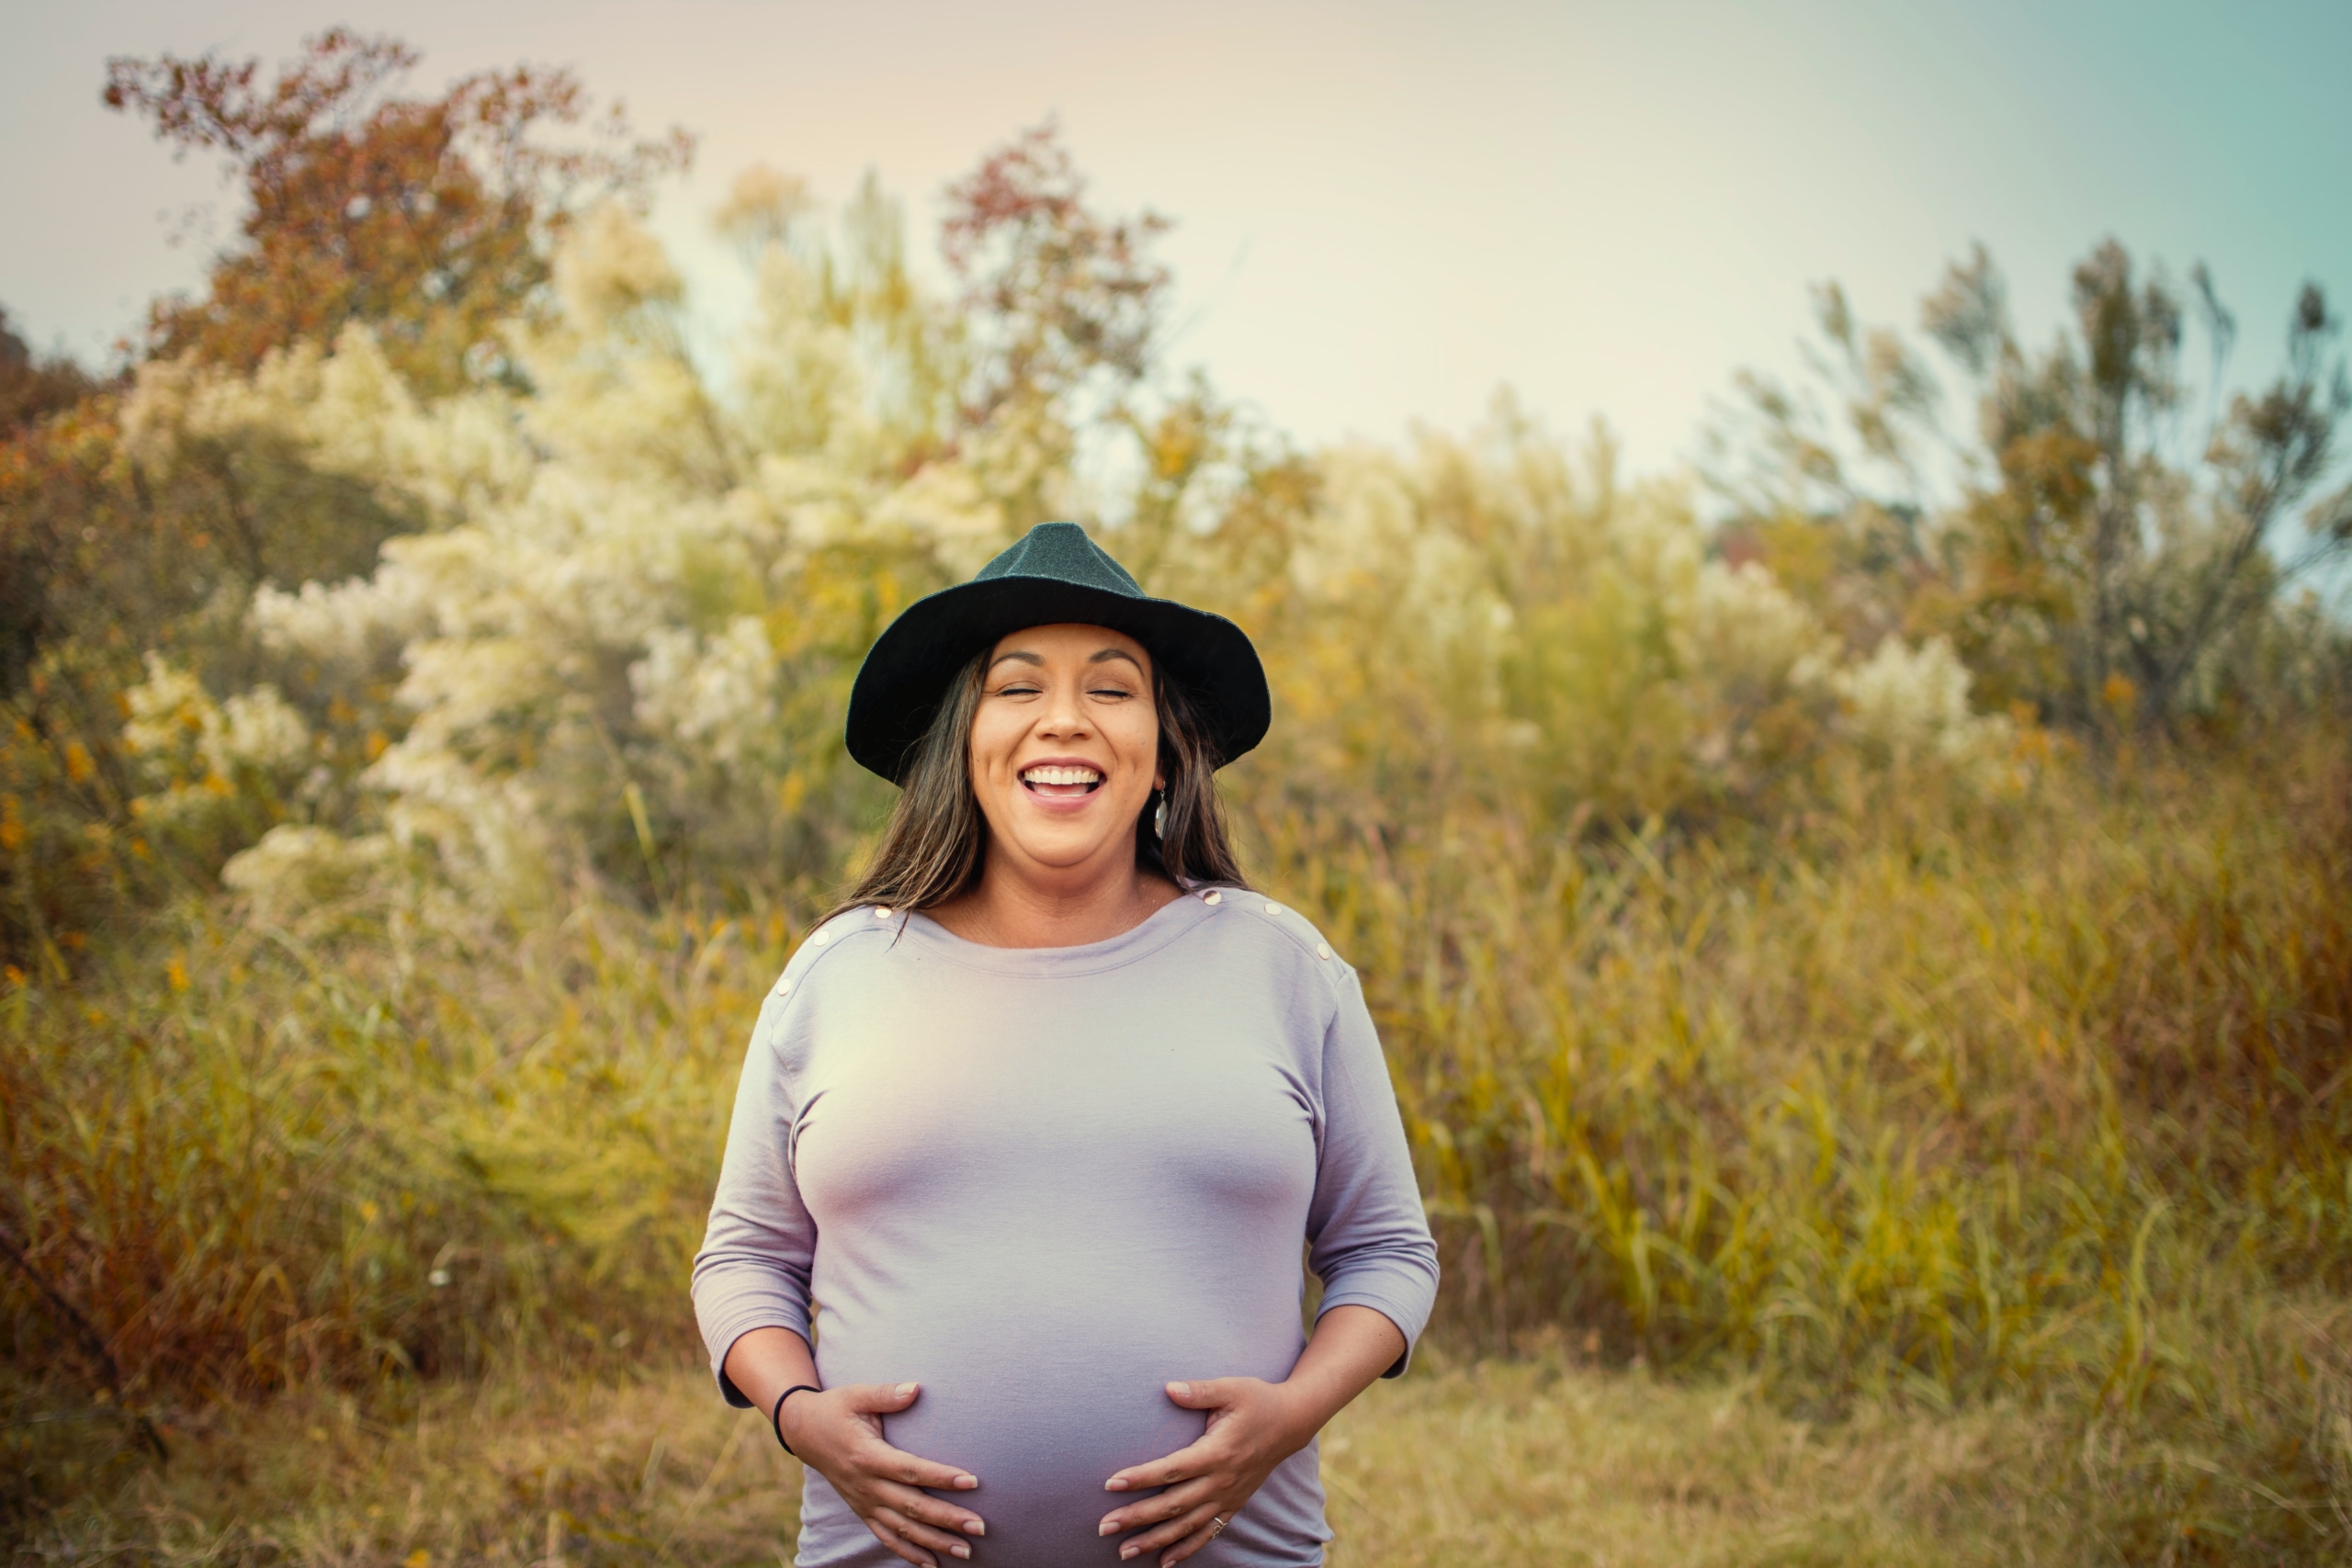 What is the ideal age for surrogacy?